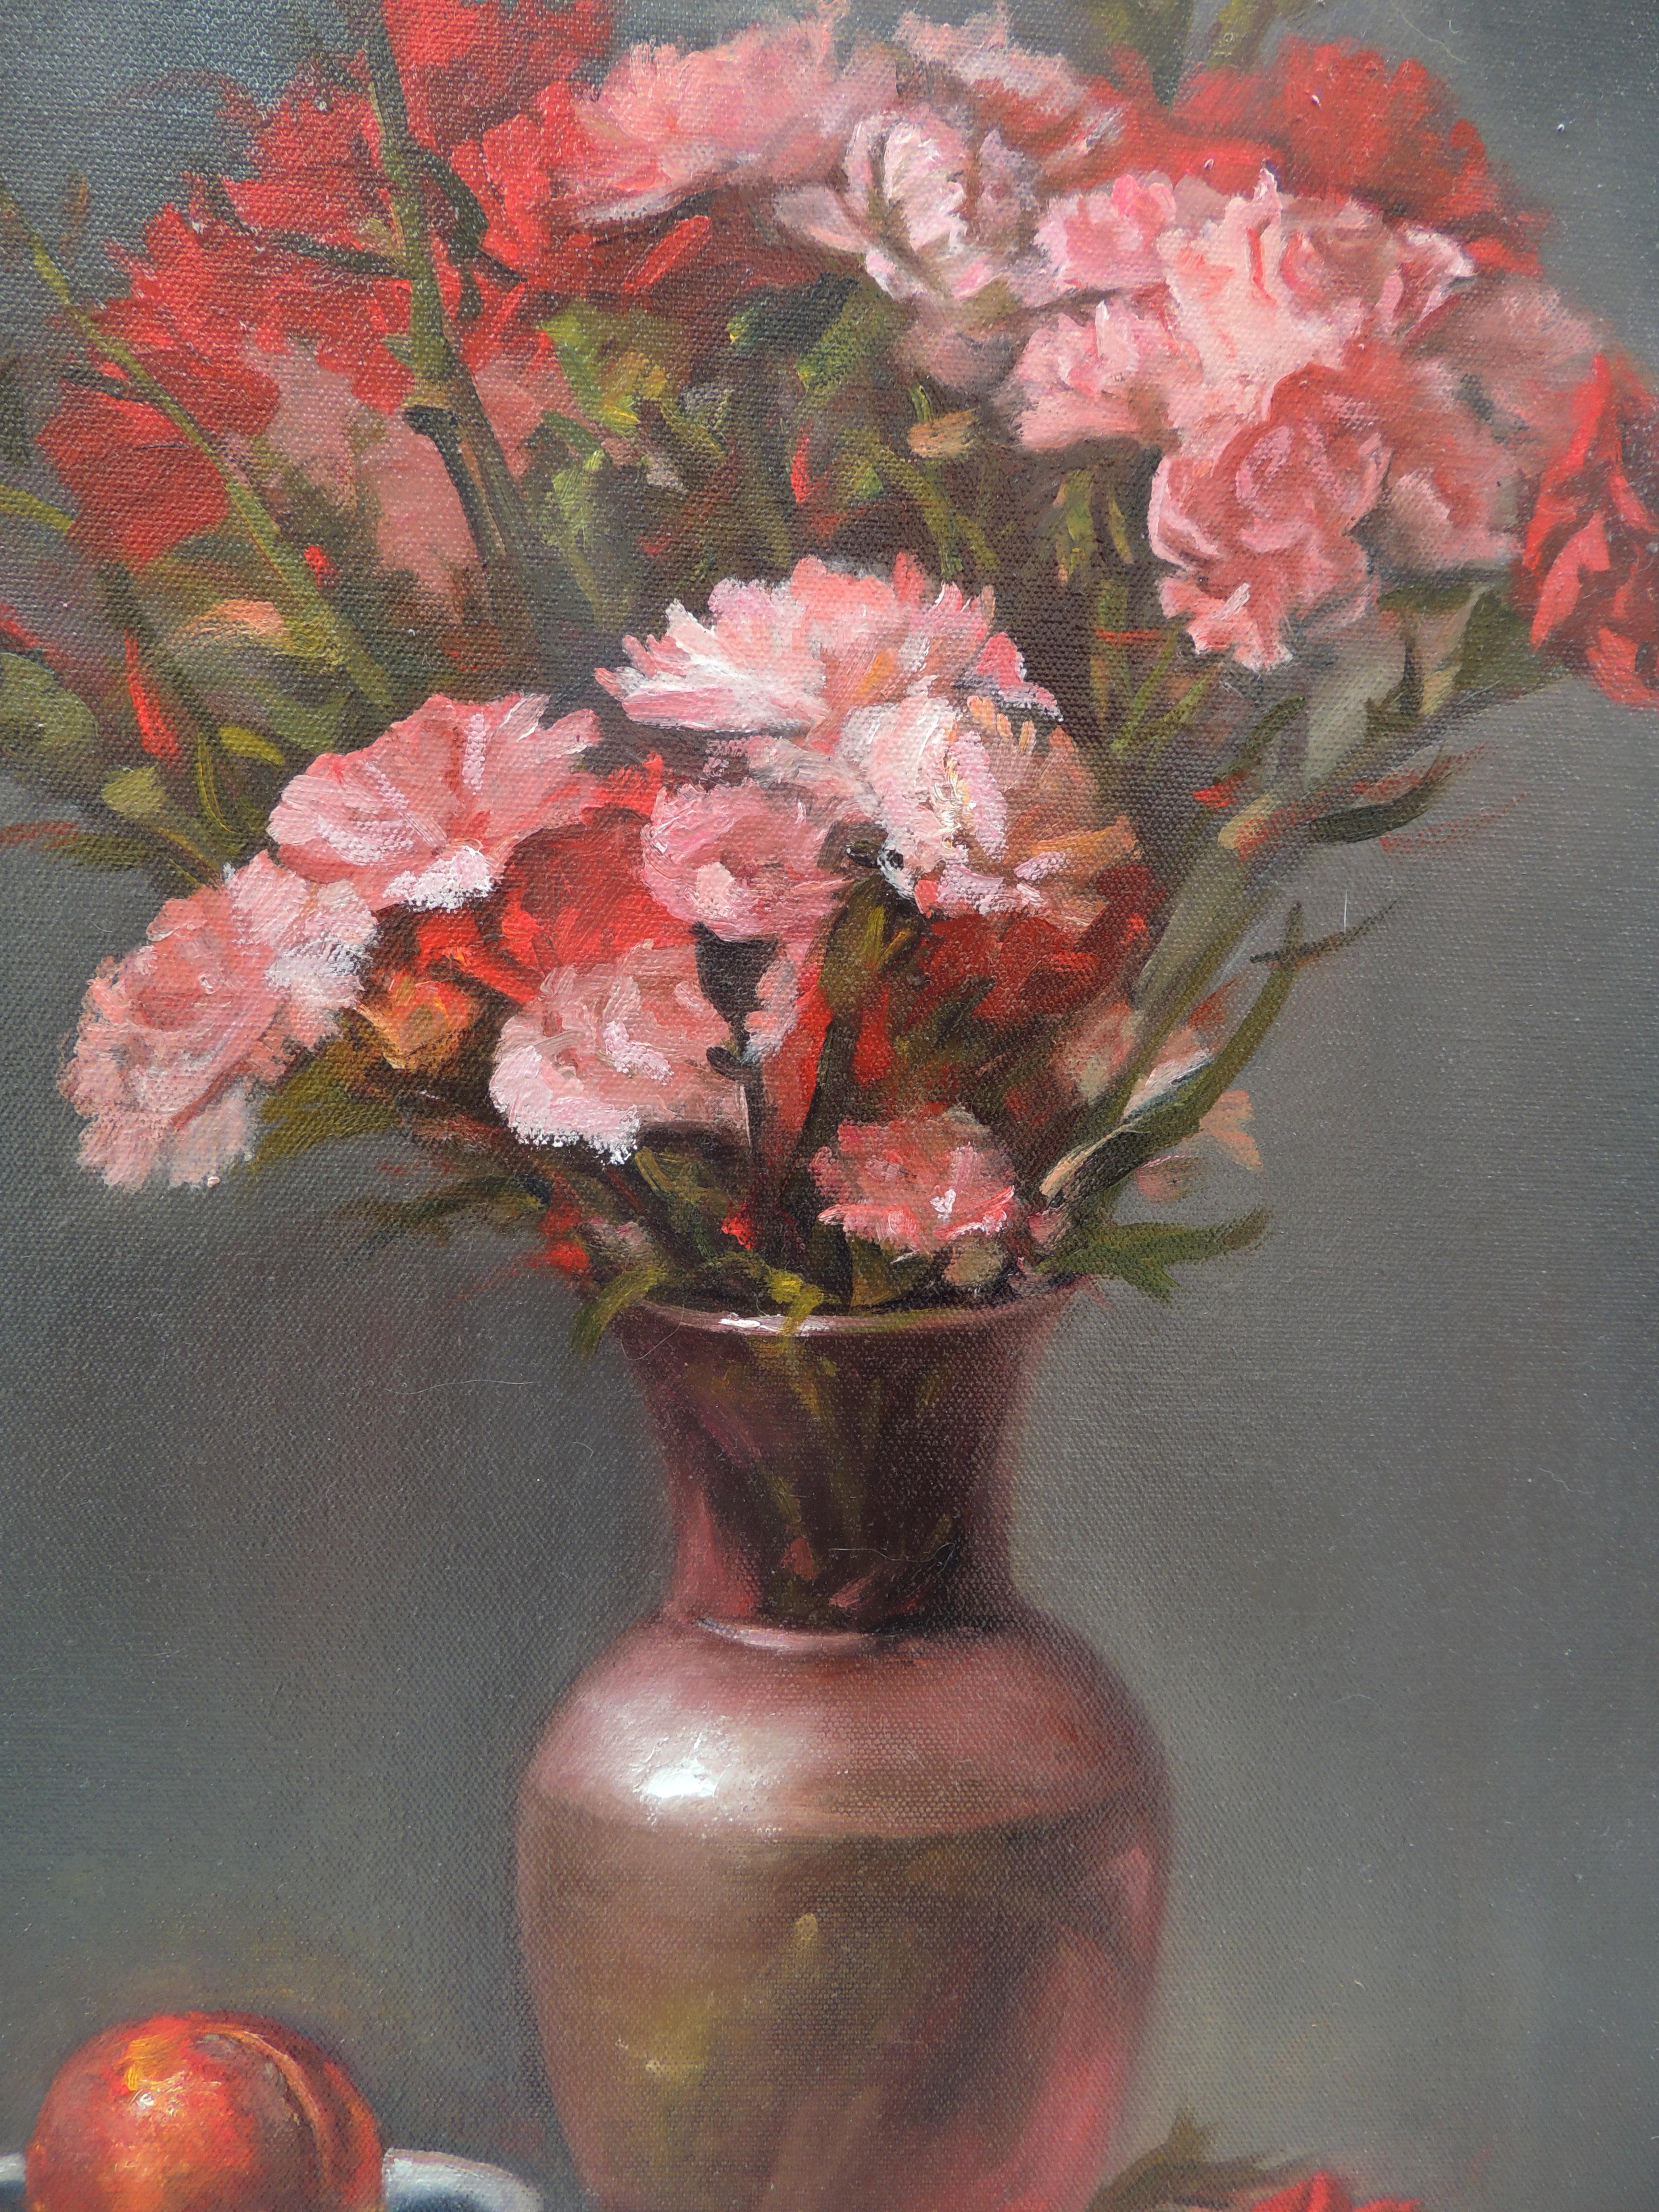 <p>Artist Comments<br />Delicate pink and red carnations in a translucent pink vase on dark grey. Zhi conceived this scene as a backward curving 'C' design, with a special emphasis on the closest flowers. The light shines from the left, gently